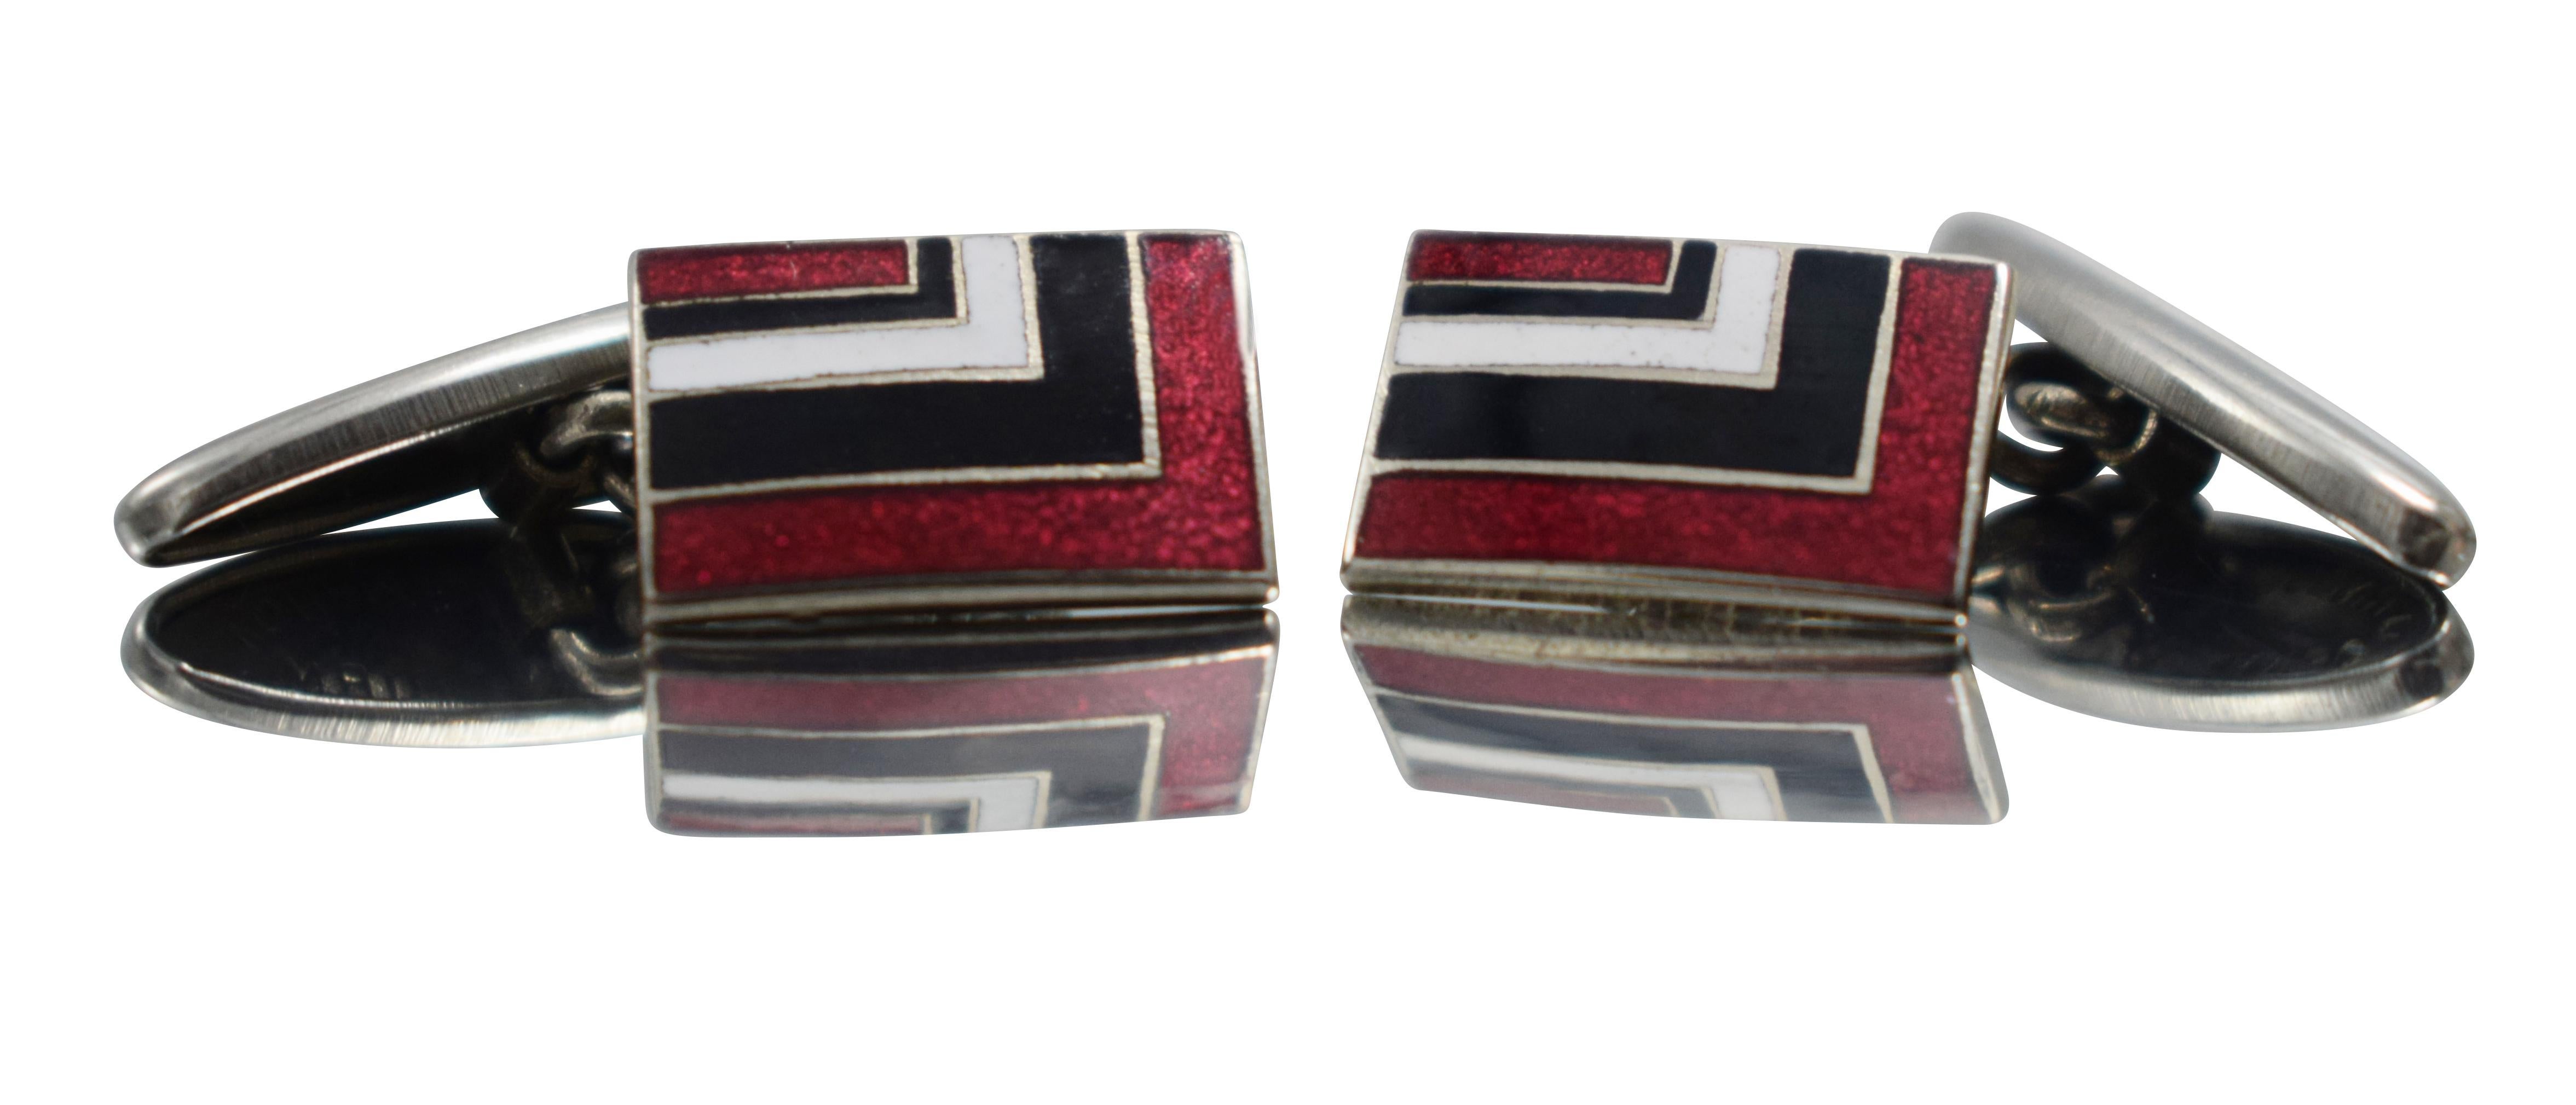 For gentleman out there who lean towards something a little different and less generic and oozing style consider these original matching pair of Art Deco men’s cufflinks with a great geometric pattern. Silver toned metal with red, white and black